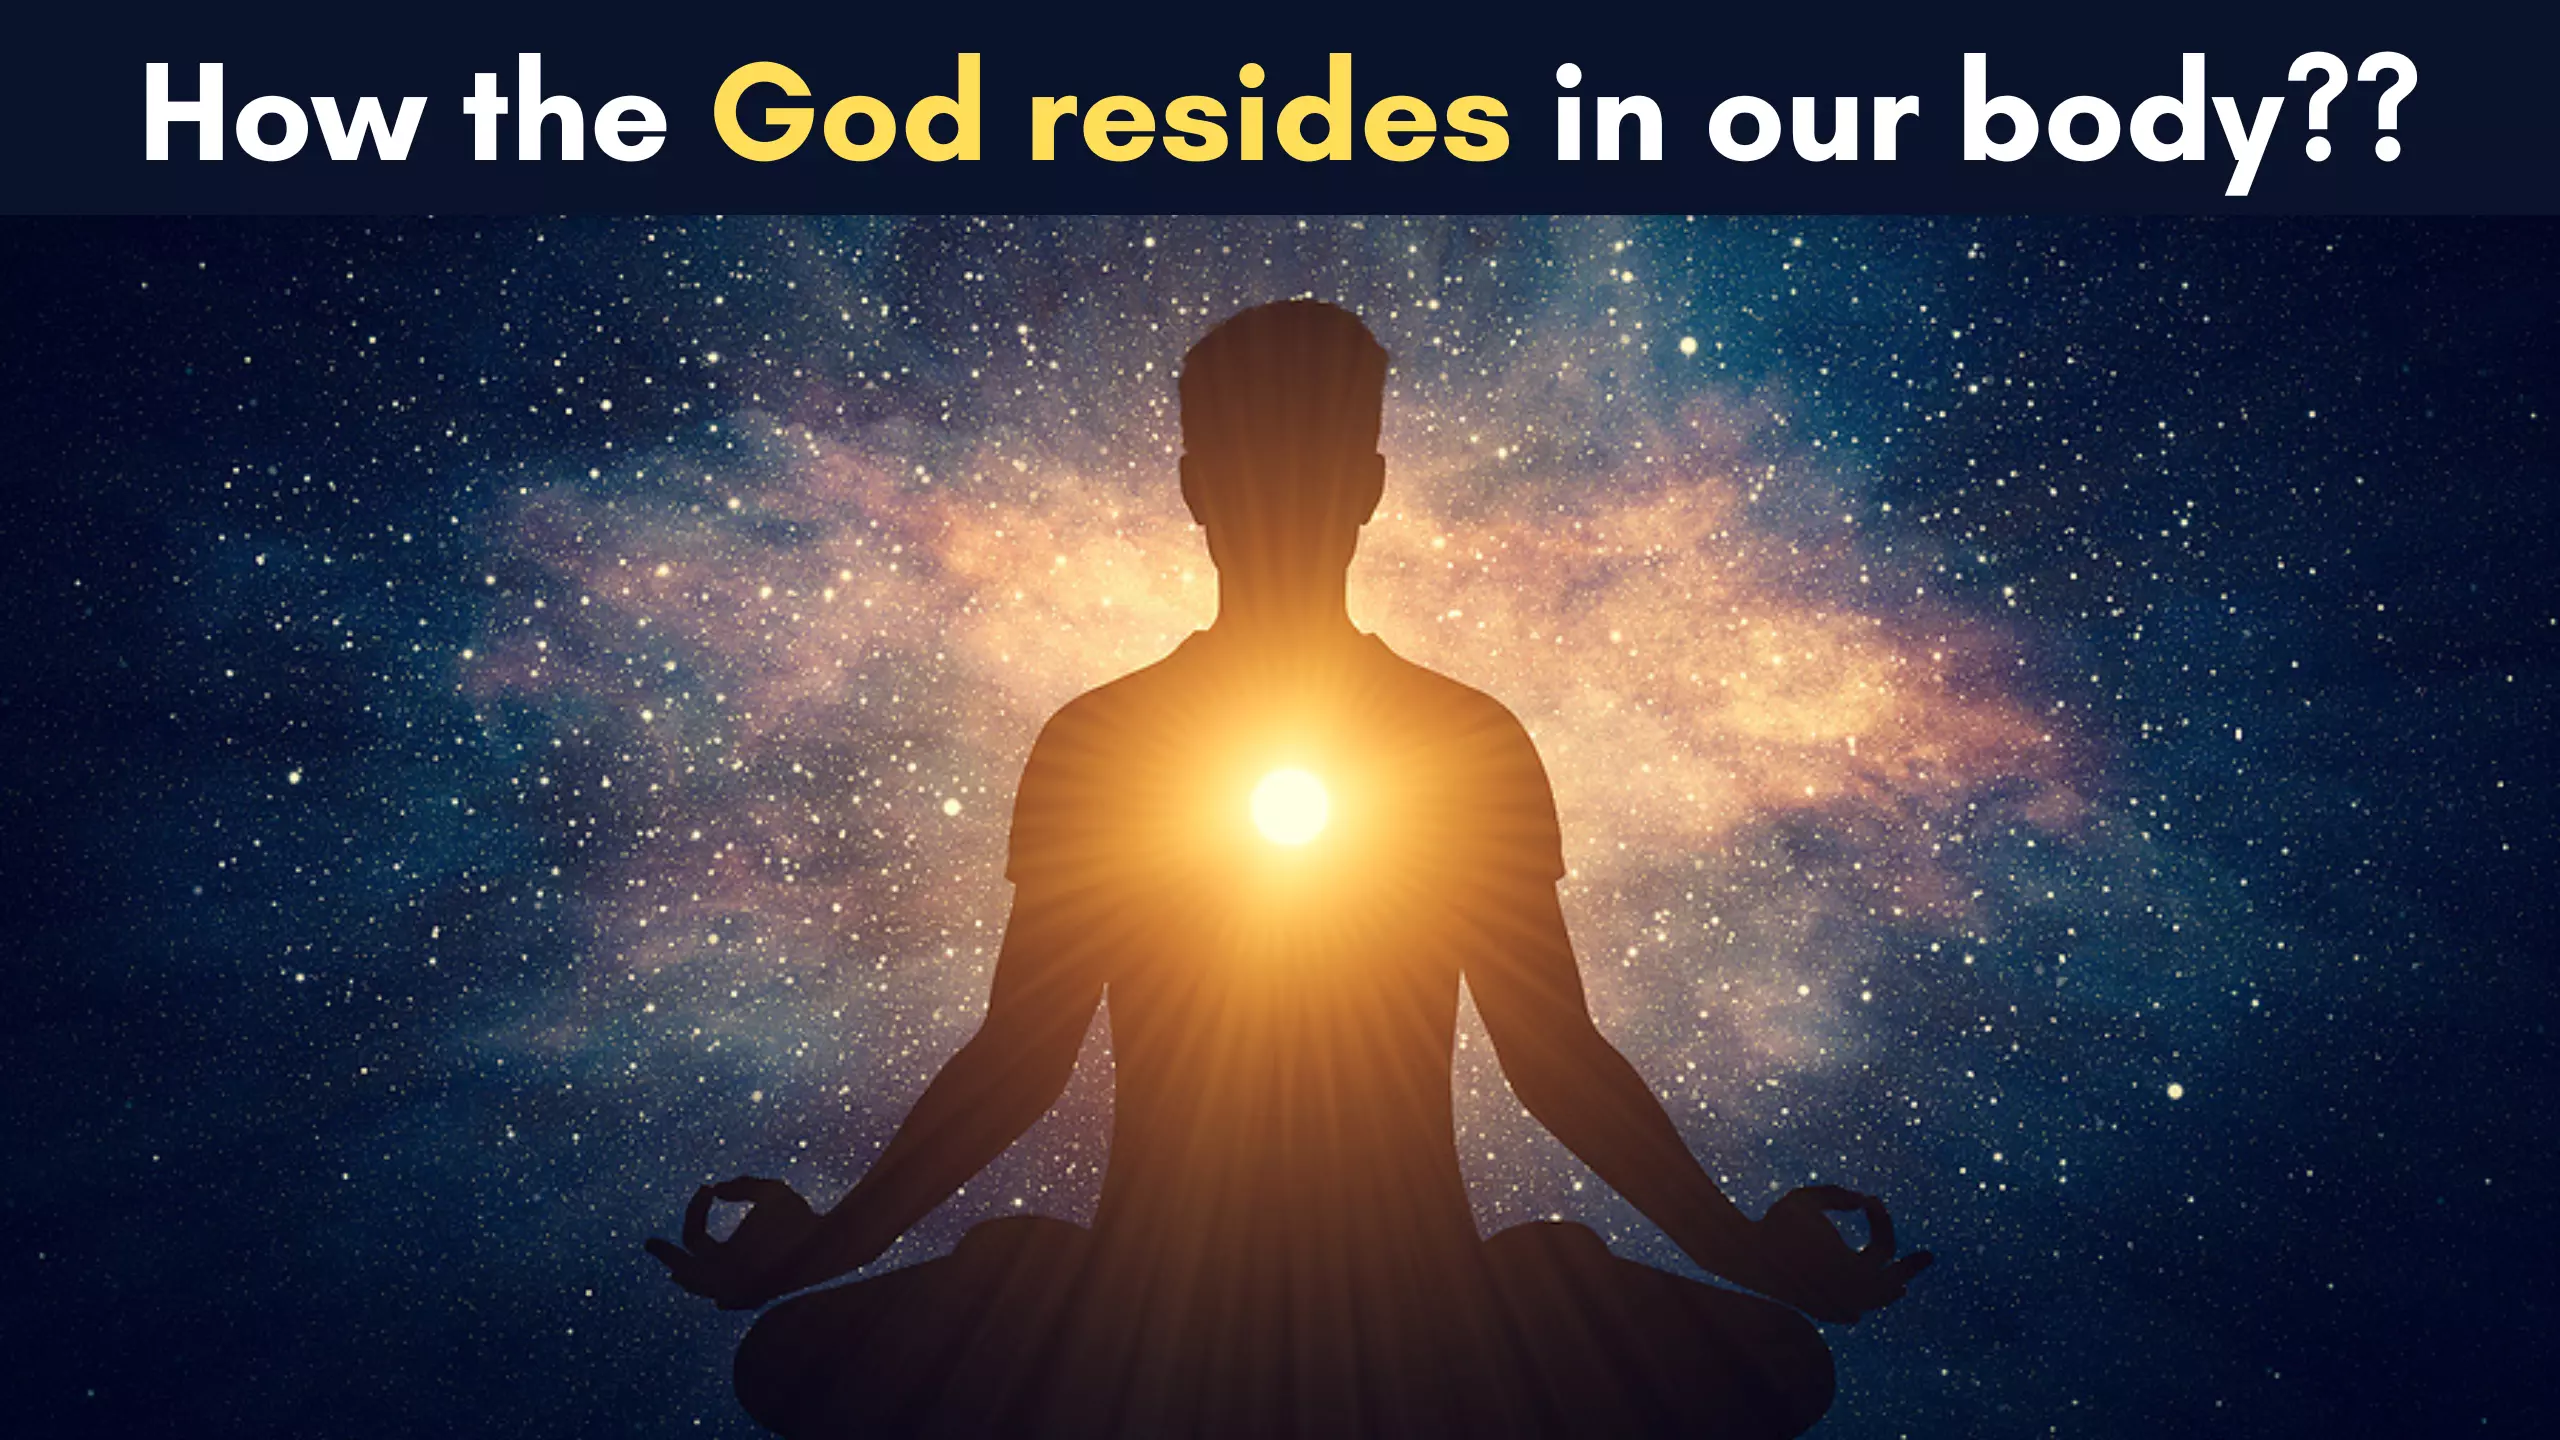 How the God resides in our body?